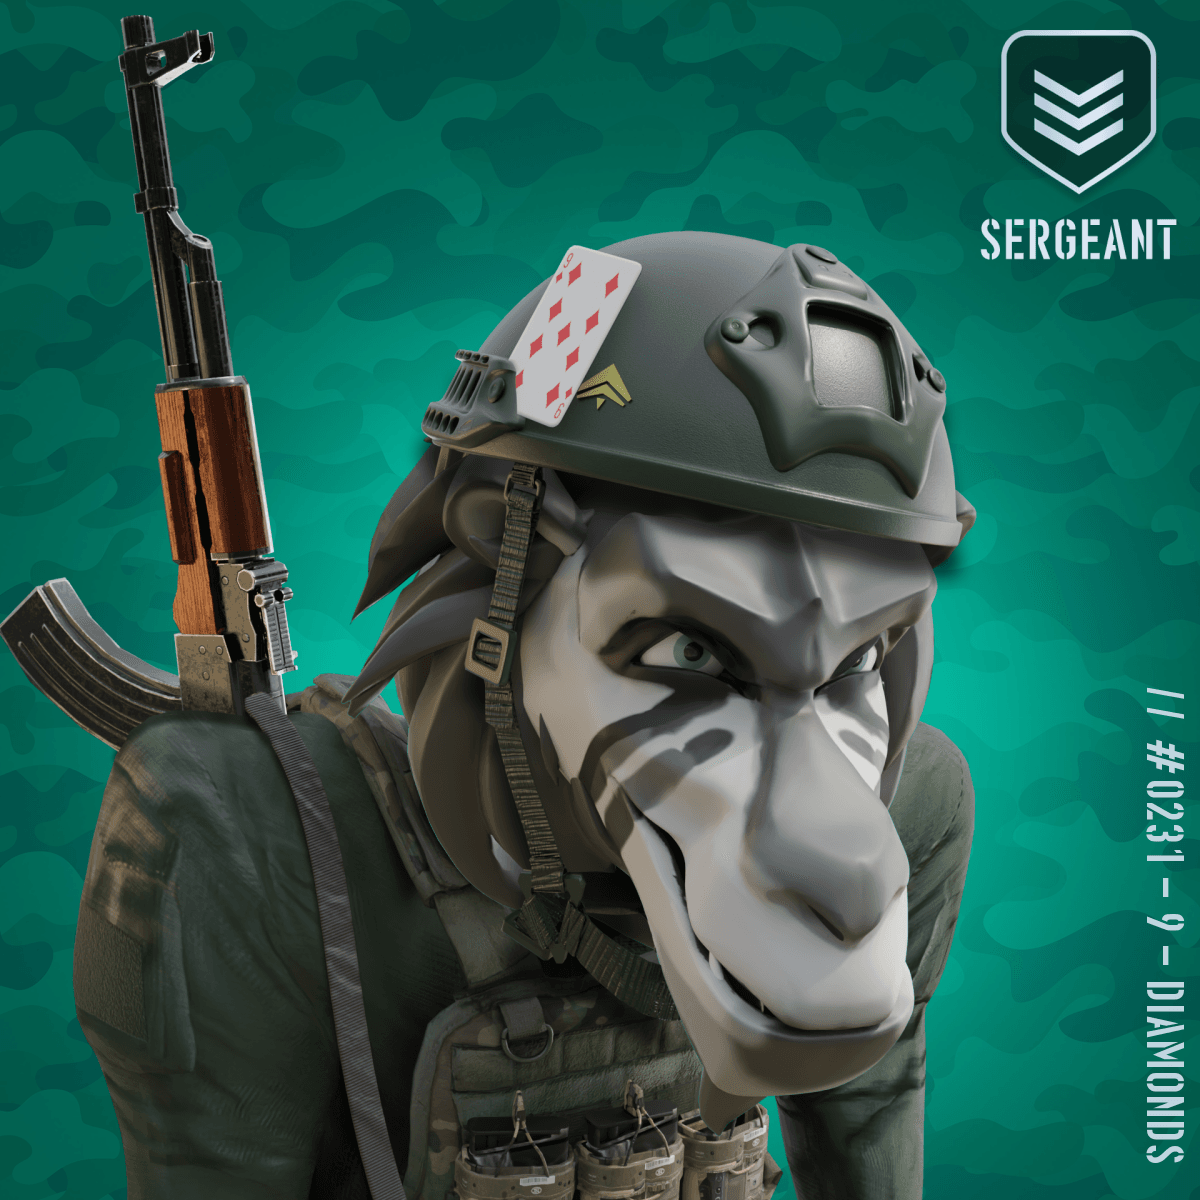 Angry Black Sergeant Baboon #231